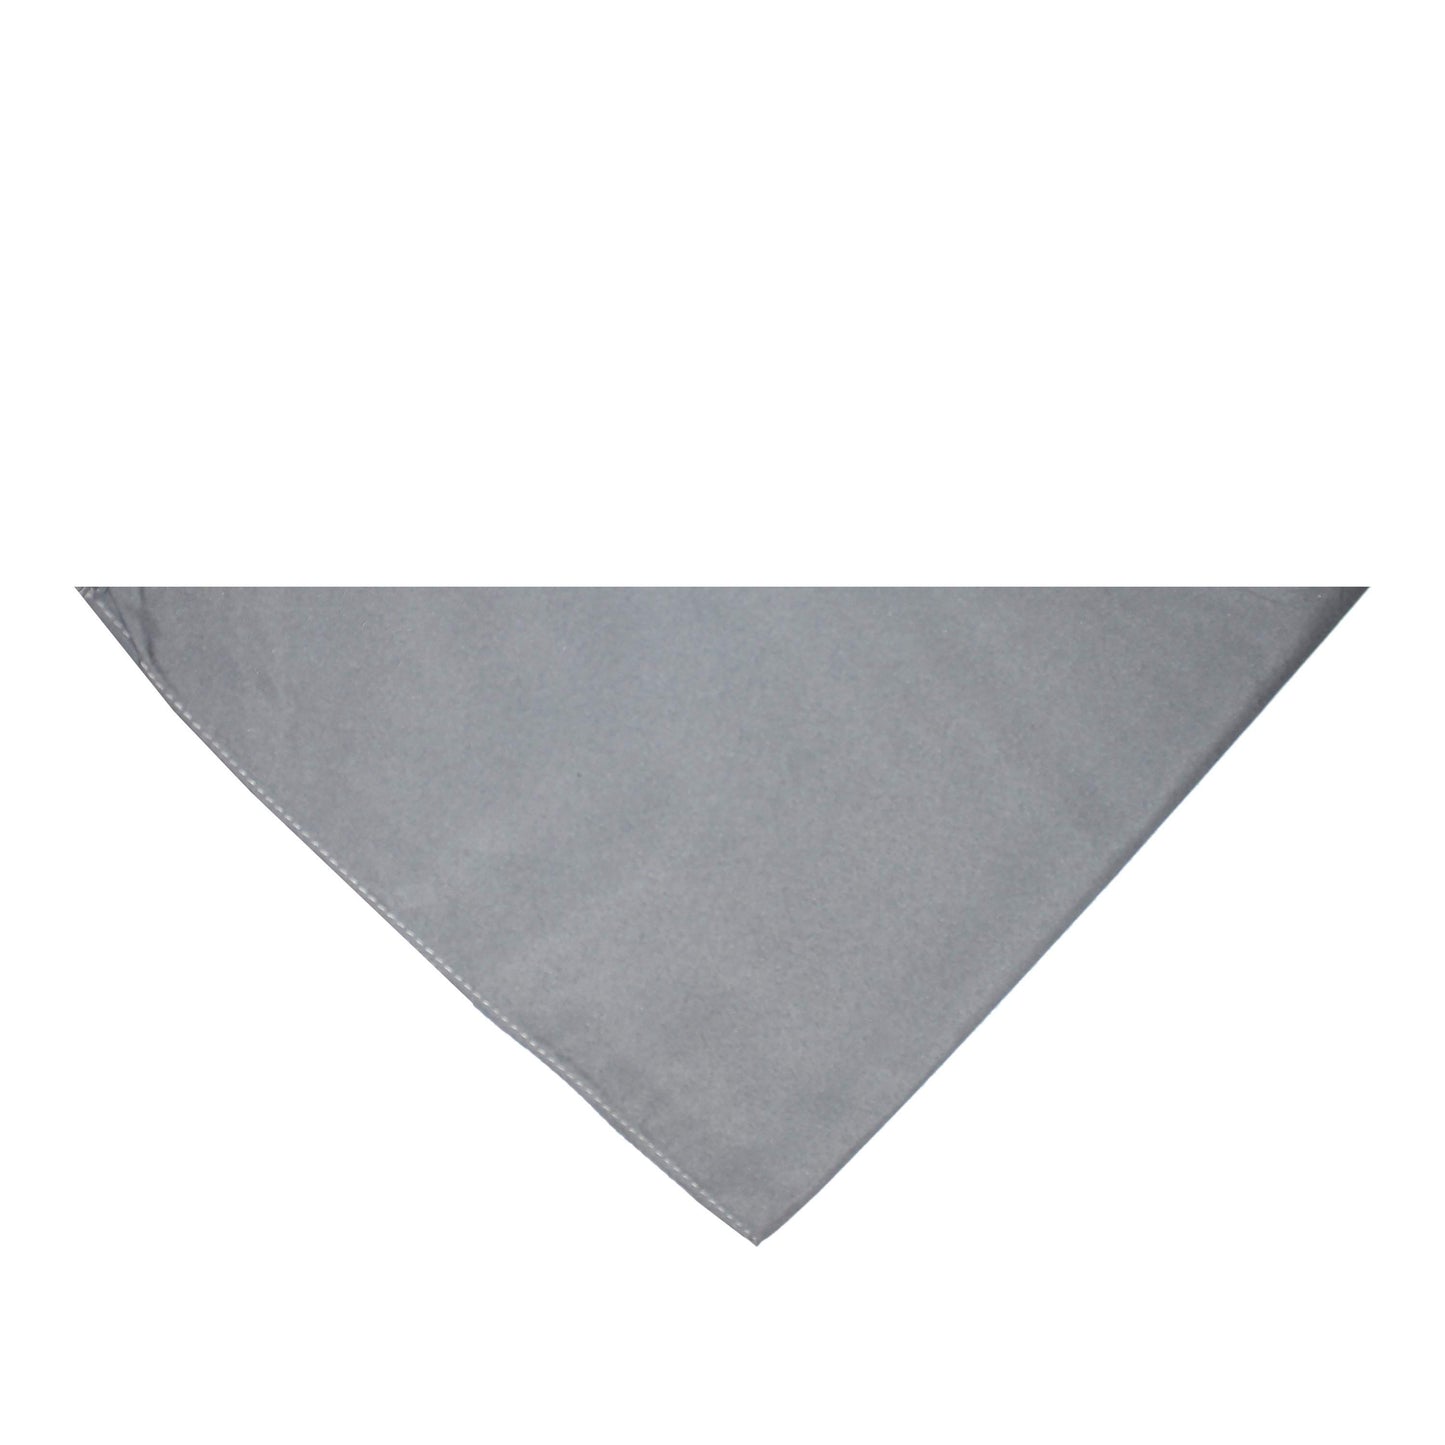 Pack of 8 Triangle Bandanas - Solid Colors and Polyester - 30 in x 20 in x 20 in